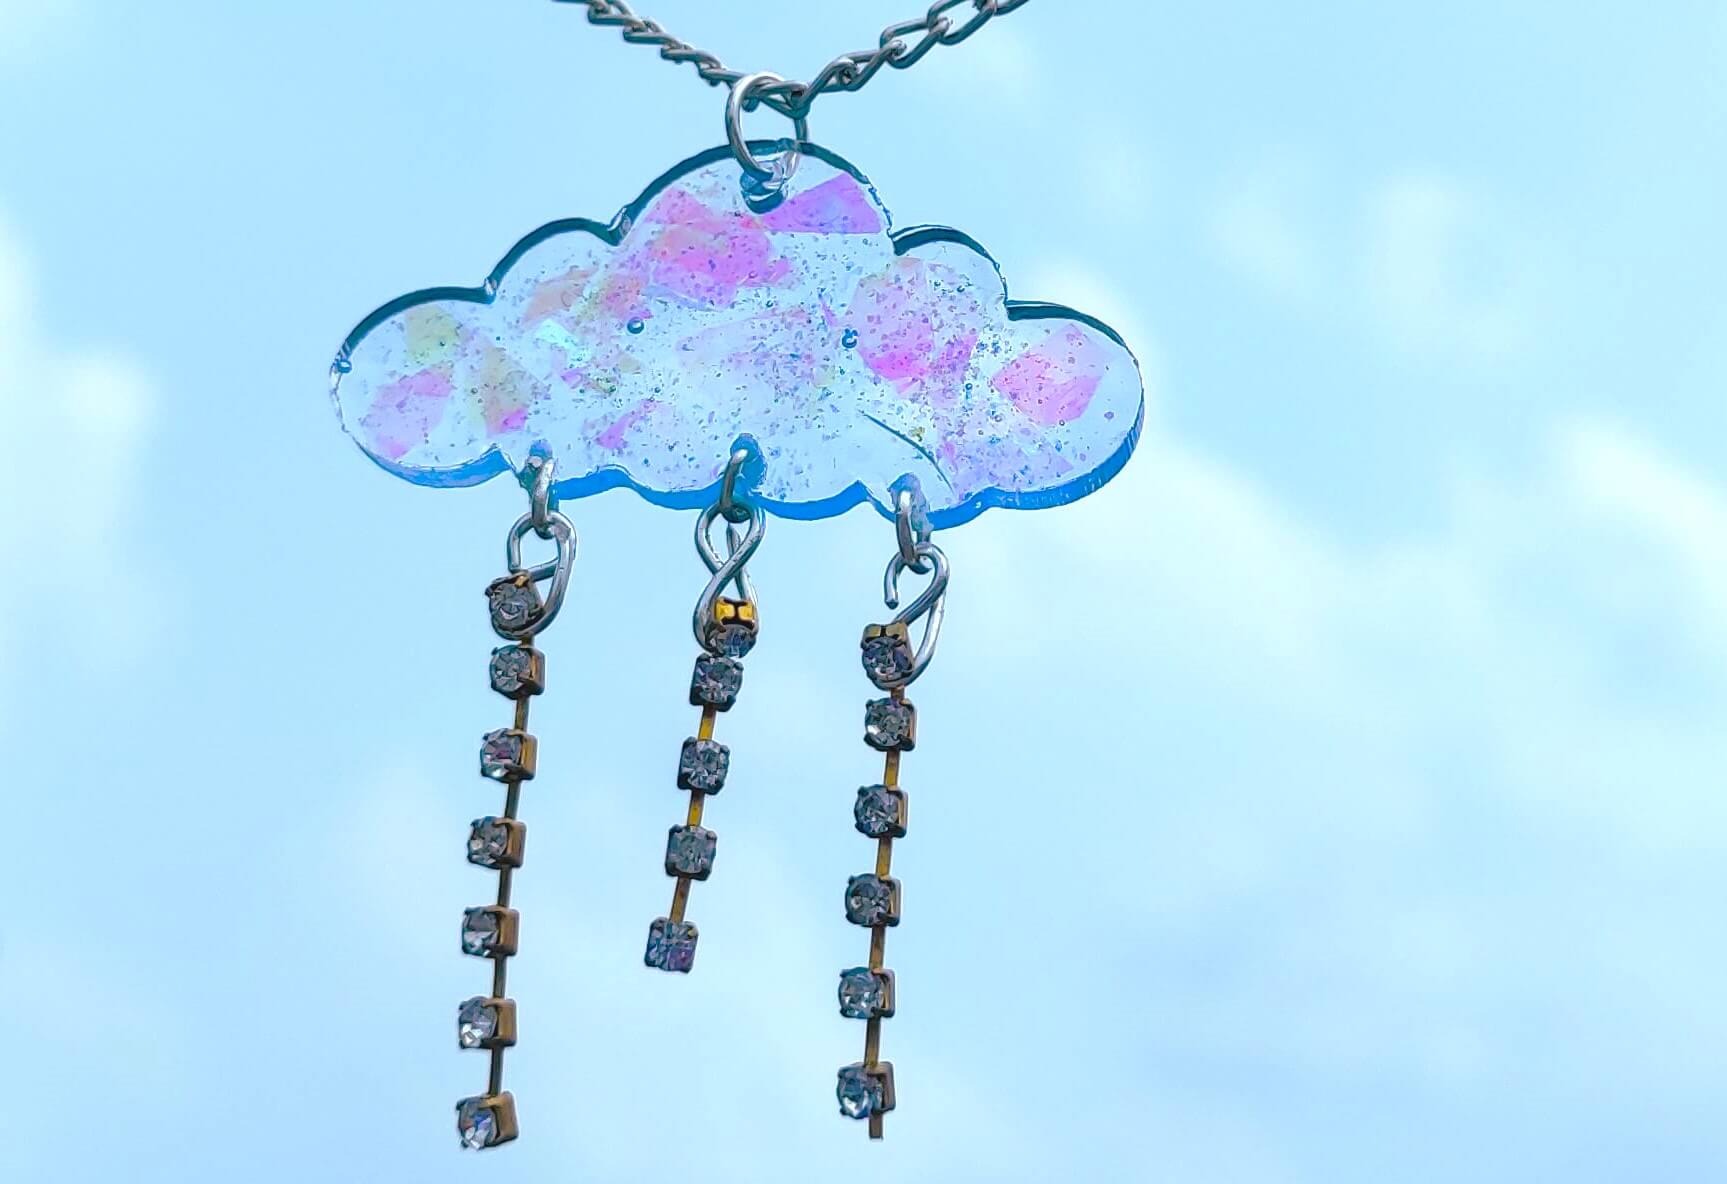 resin pendent in front of clouds